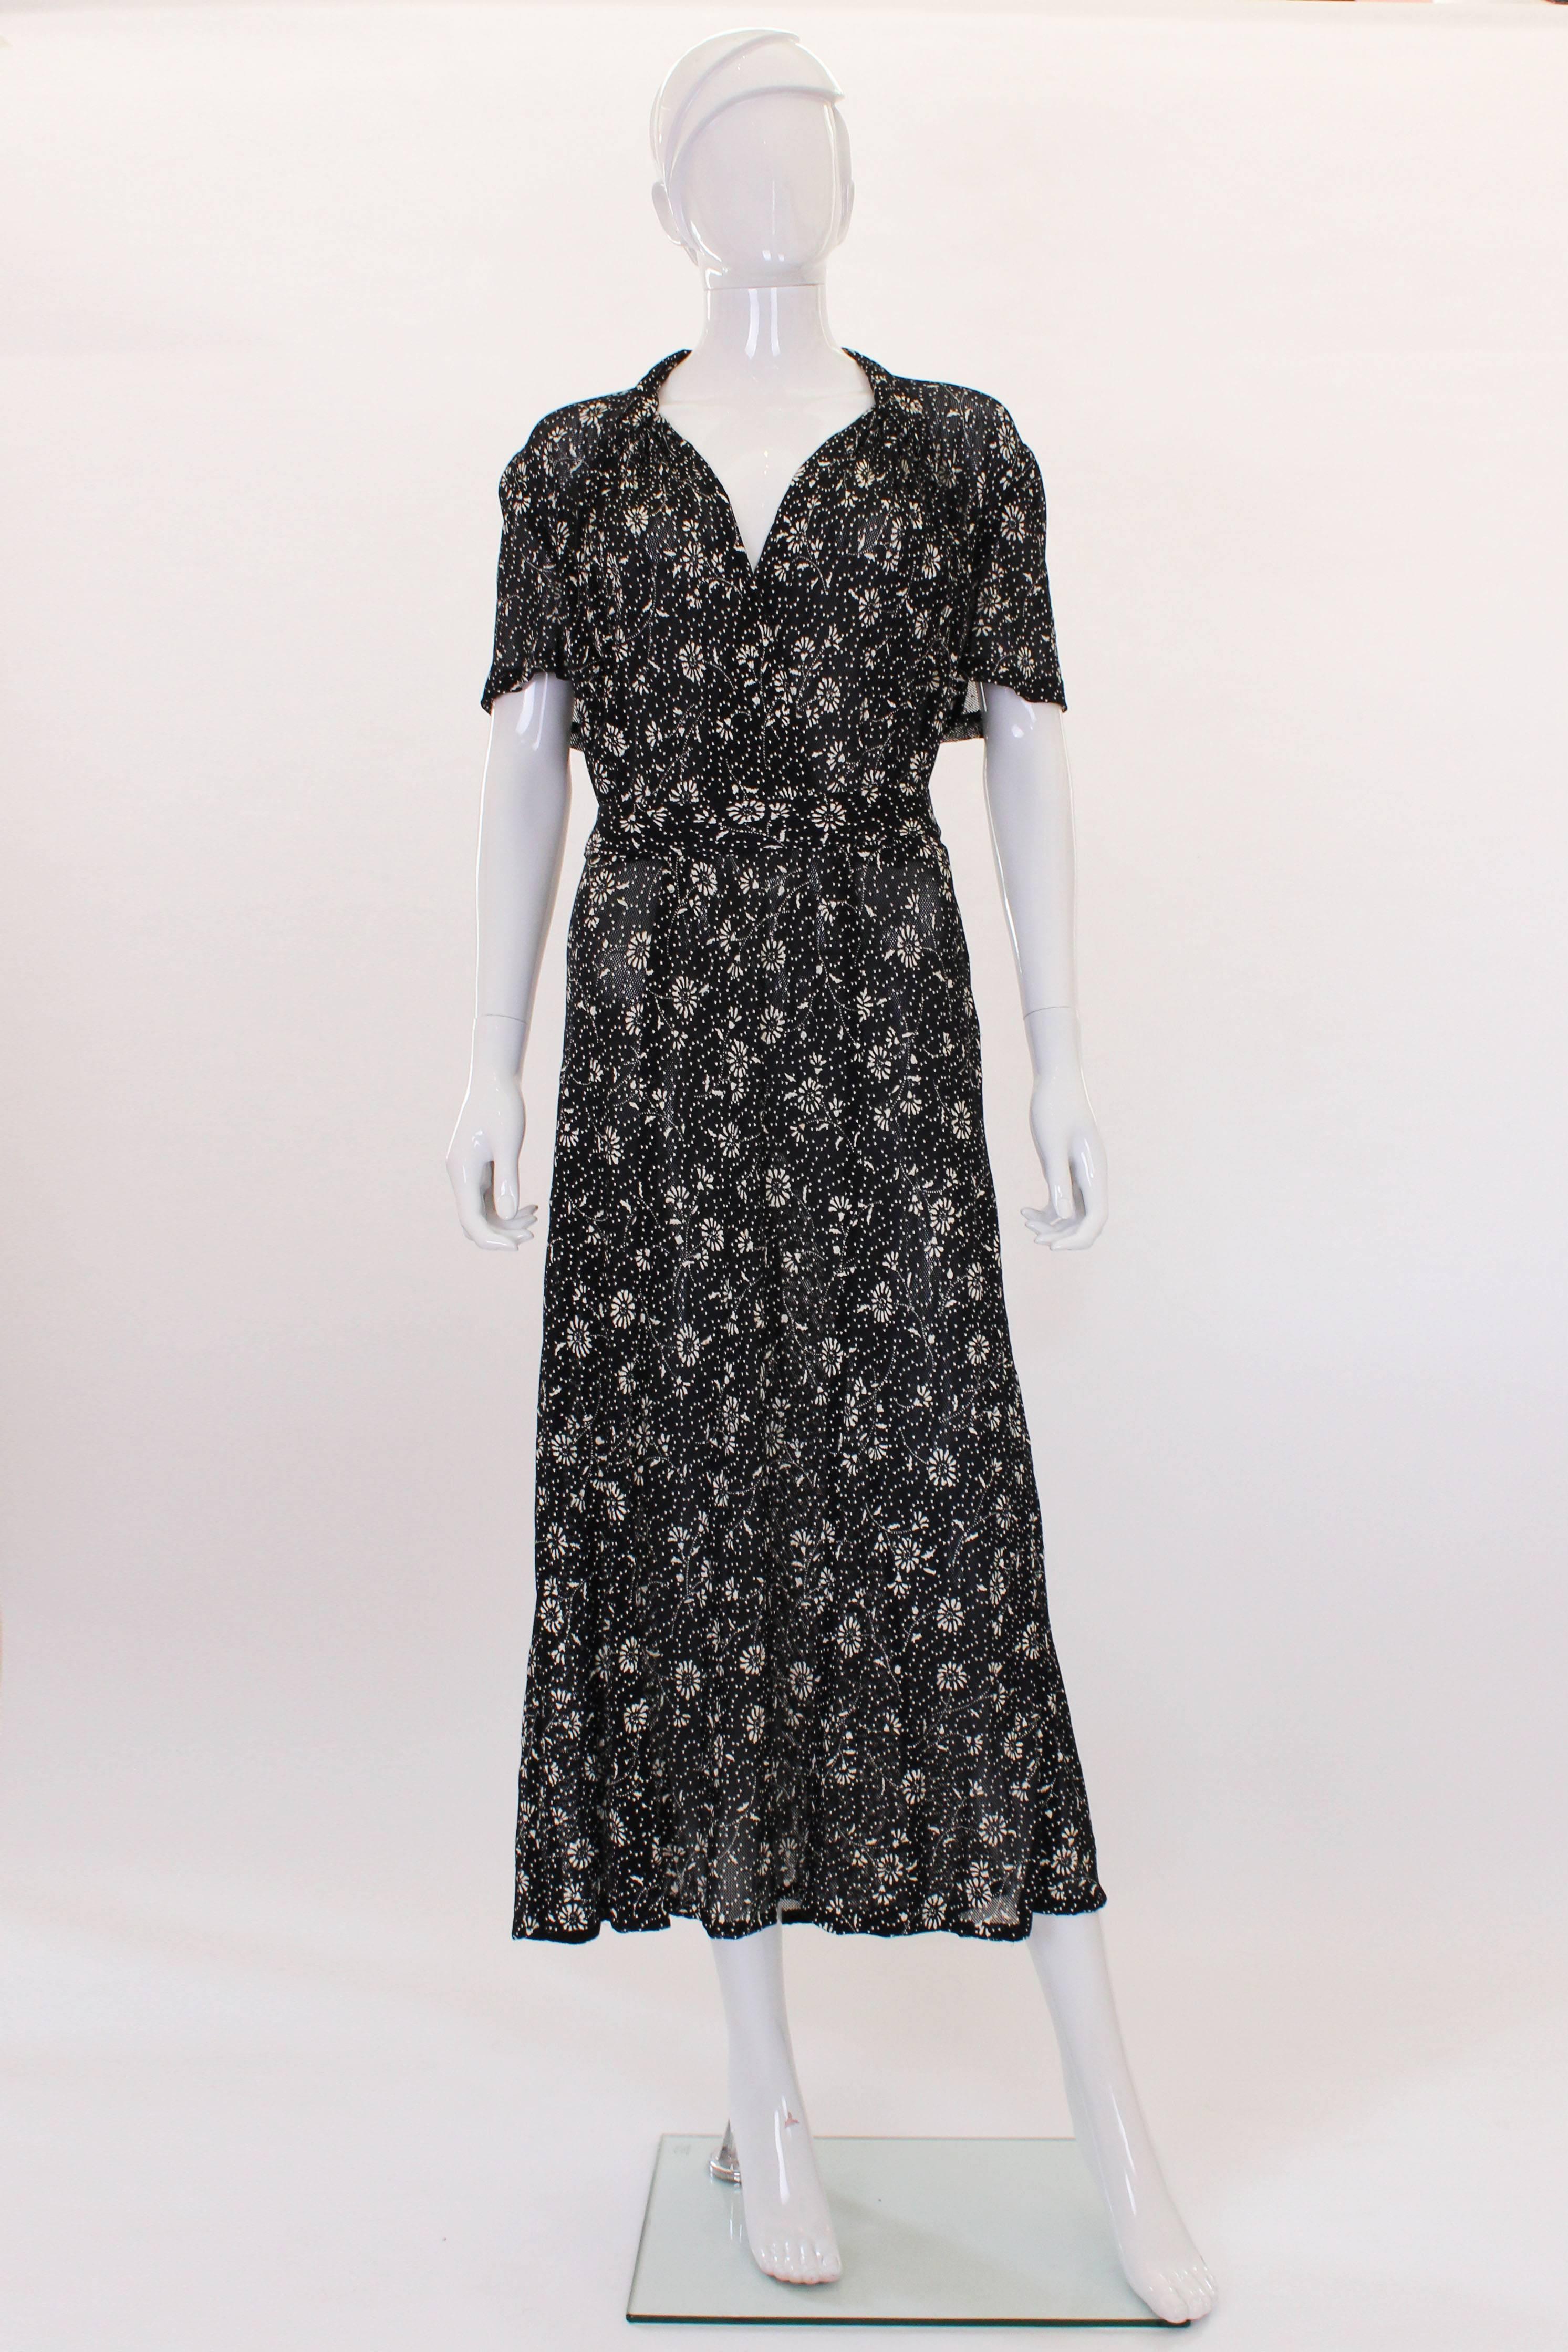 This 1940s dress is quite an unusual piece. The fabric of the dress is a dense very dark navy mesh with an ivory floral print that is stencil printed on. The top of the dress has some rouching over the bust. There are small circular cut out that the